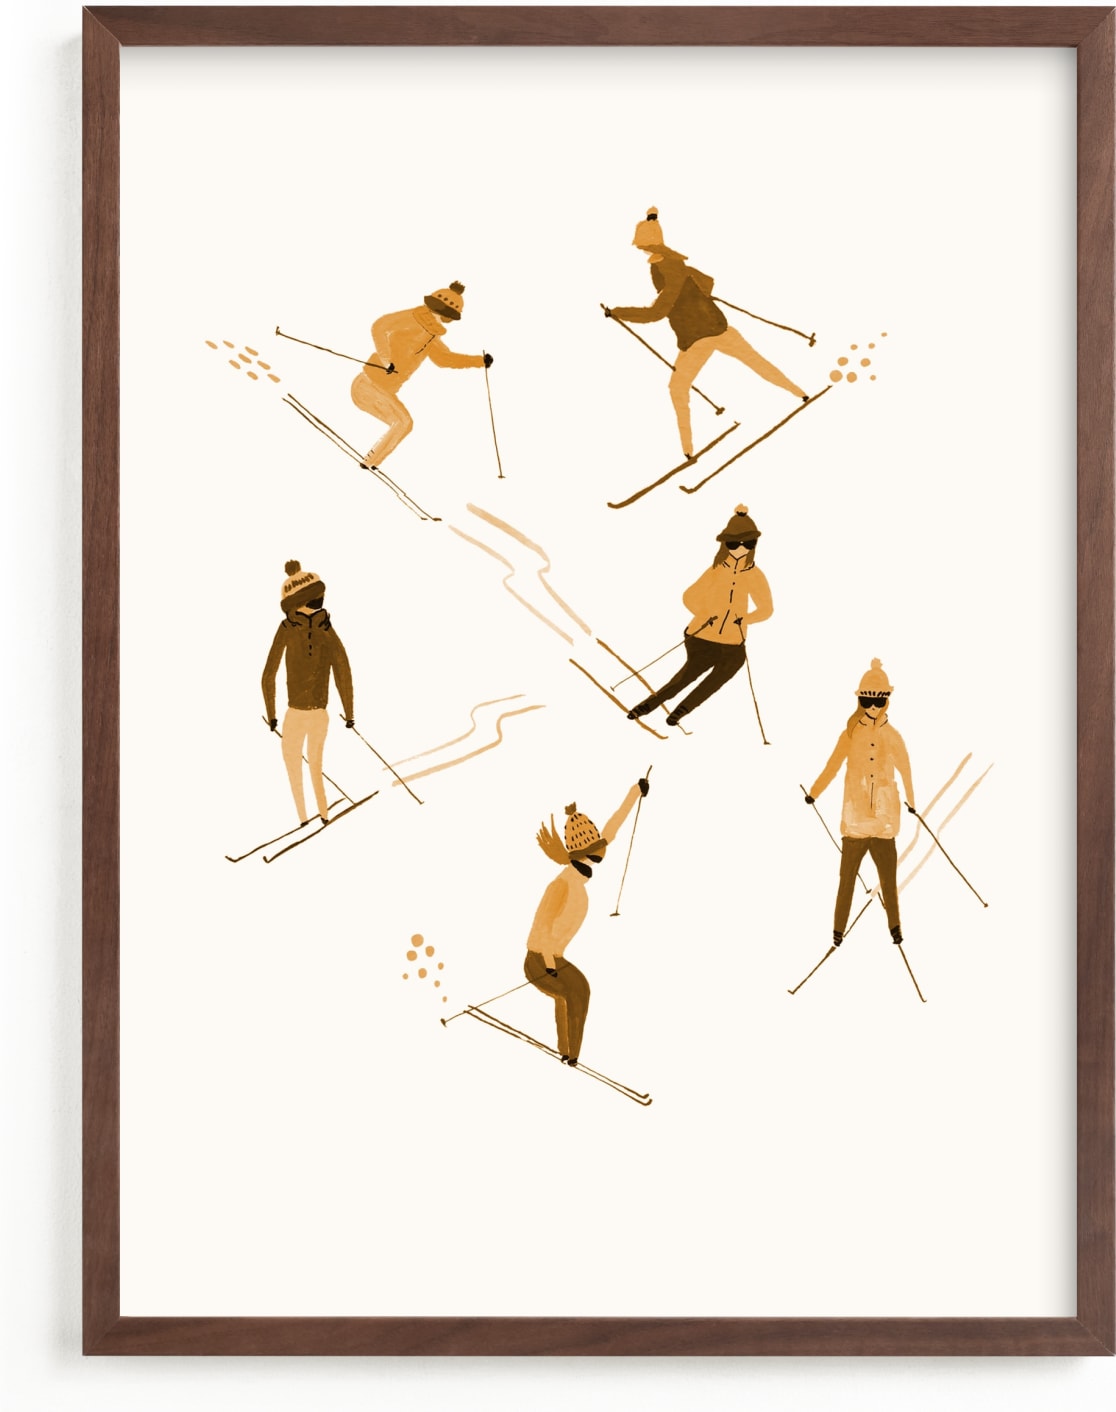 This is a brown kids wall art by Anee Shah called Ski people.